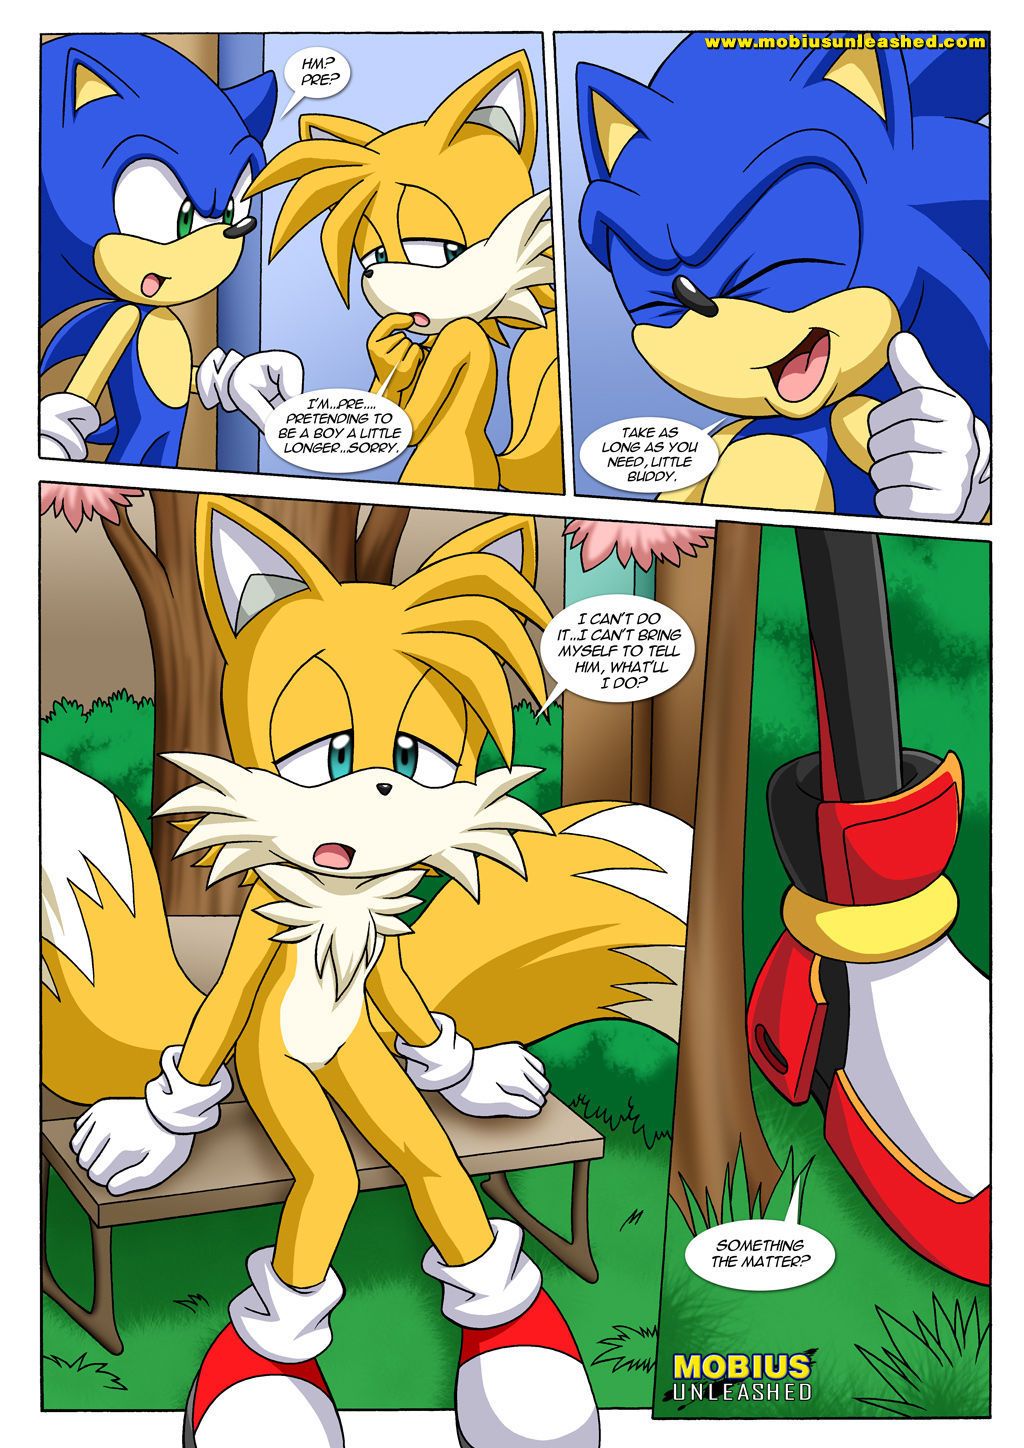 Palcomix Tails Tales 2 (Sonic the Hedgehog)